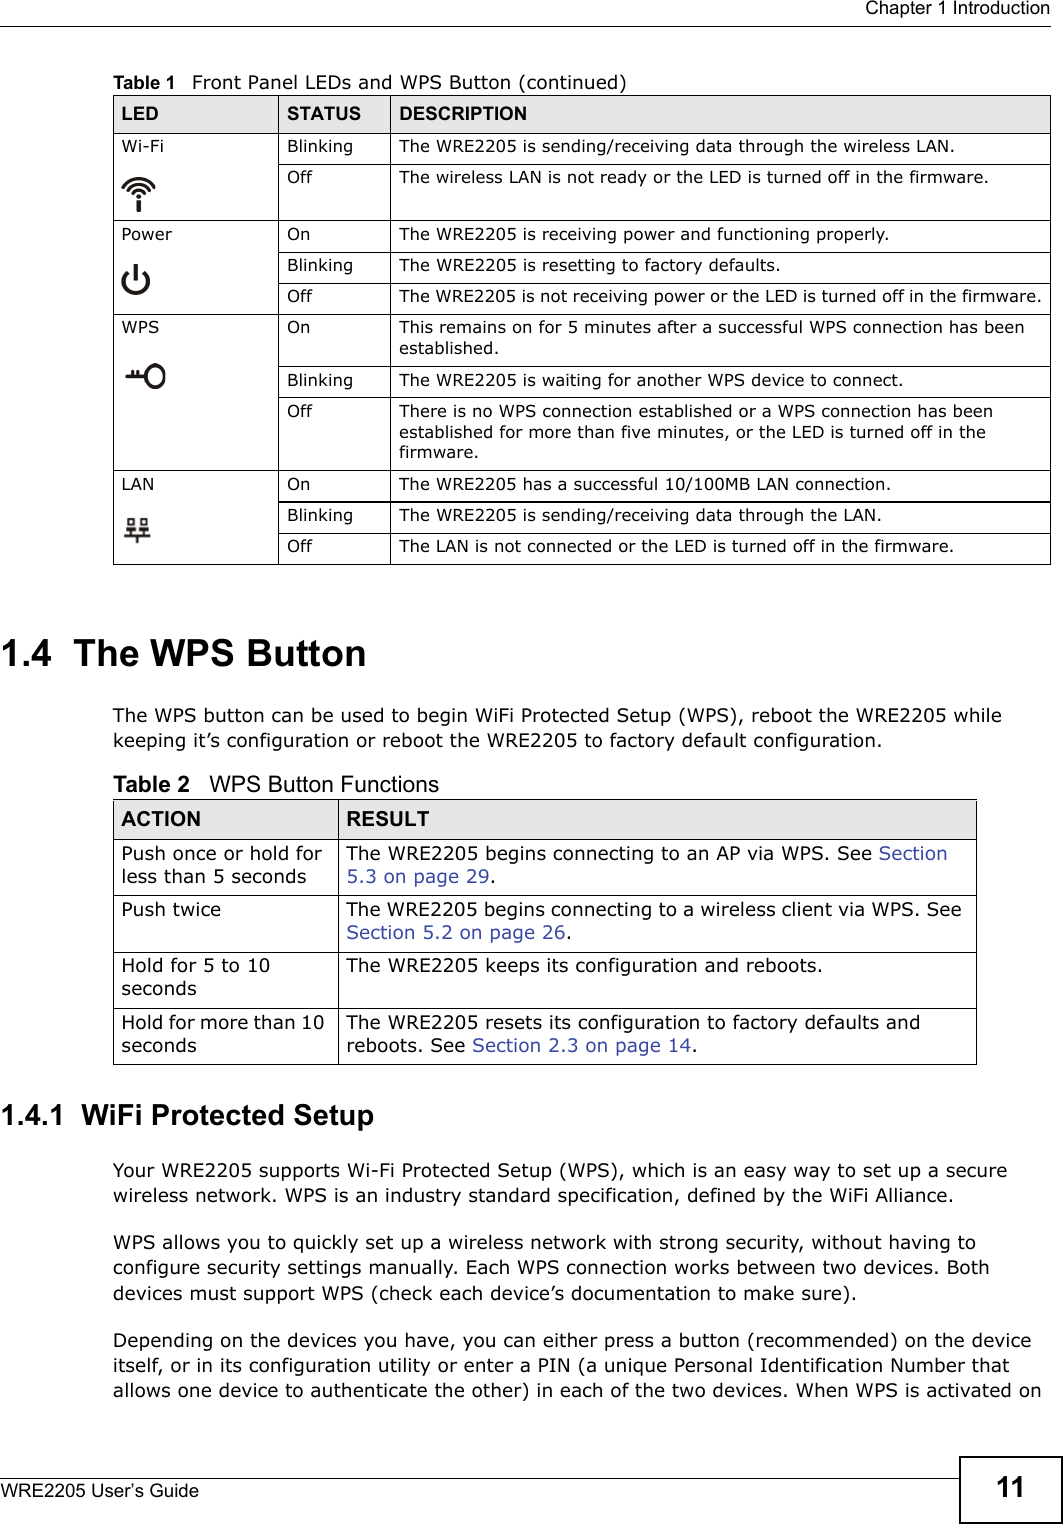  Chapter 1 IntroductionWRE2205 User’s Guide 111.4  The WPS ButtonThe WPS button can be used to begin WiFi Protected Setup (WPS), reboot the WRE2205 while keeping it’s configuration or reboot the WRE2205 to factory default configuration.1.4.1  WiFi Protected SetupYour WRE2205 supports Wi-Fi Protected Setup (WPS), which is an easy way to set up a secure wireless network. WPS is an industry standard specification, defined by the WiFi Alliance.WPS allows you to quickly set up a wireless network with strong security, without having to configure security settings manually. Each WPS connection works between two devices. Both devices must support WPS (check each device’s documentation to make sure). Depending on the devices you have, you can either press a button (recommended) on the device itself, or in its configuration utility or enter a PIN (a unique Personal Identification Number that allows one device to authenticate the other) in each of the two devices. When WPS is activated on Wi-Fi  Blinking The WRE2205 is sending/receiving data through the wireless LAN.Off The wireless LAN is not ready or the LED is turned off in the firmware.Power On The WRE2205 is receiving power and functioning properly. Blinking The WRE2205 is resetting to factory defaults.Off The WRE2205 is not receiving power or the LED is turned off in the firmware.WPS On This remains on for 5 minutes after a successful WPS connection has been established.Blinking The WRE2205 is waiting for another WPS device to connect.Off There is no WPS connection established or a WPS connection has been established for more than five minutes, or the LED is turned off in the firmware.LAN On The WRE2205 has a successful 10/100MB LAN connection. Blinking The WRE2205 is sending/receiving data through the LAN.Off The LAN is not connected or the LED is turned off in the firmware.Table 1   Front Panel LEDs and WPS Button (continued)LED STATUS DESCRIPTIONTable 2   WPS Button FunctionsACTION RESULTPush once or hold for less than 5 secondsThe WRE2205 begins connecting to an AP via WPS. See Section 5.3 on page 29.Push twice The WRE2205 begins connecting to a wireless client via WPS. See Section 5.2 on page 26.Hold for 5 to 10 secondsThe WRE2205 keeps its configuration and reboots.Hold for more than 10 secondsThe WRE2205 resets its configuration to factory defaults and reboots. See Section 2.3 on page 14.